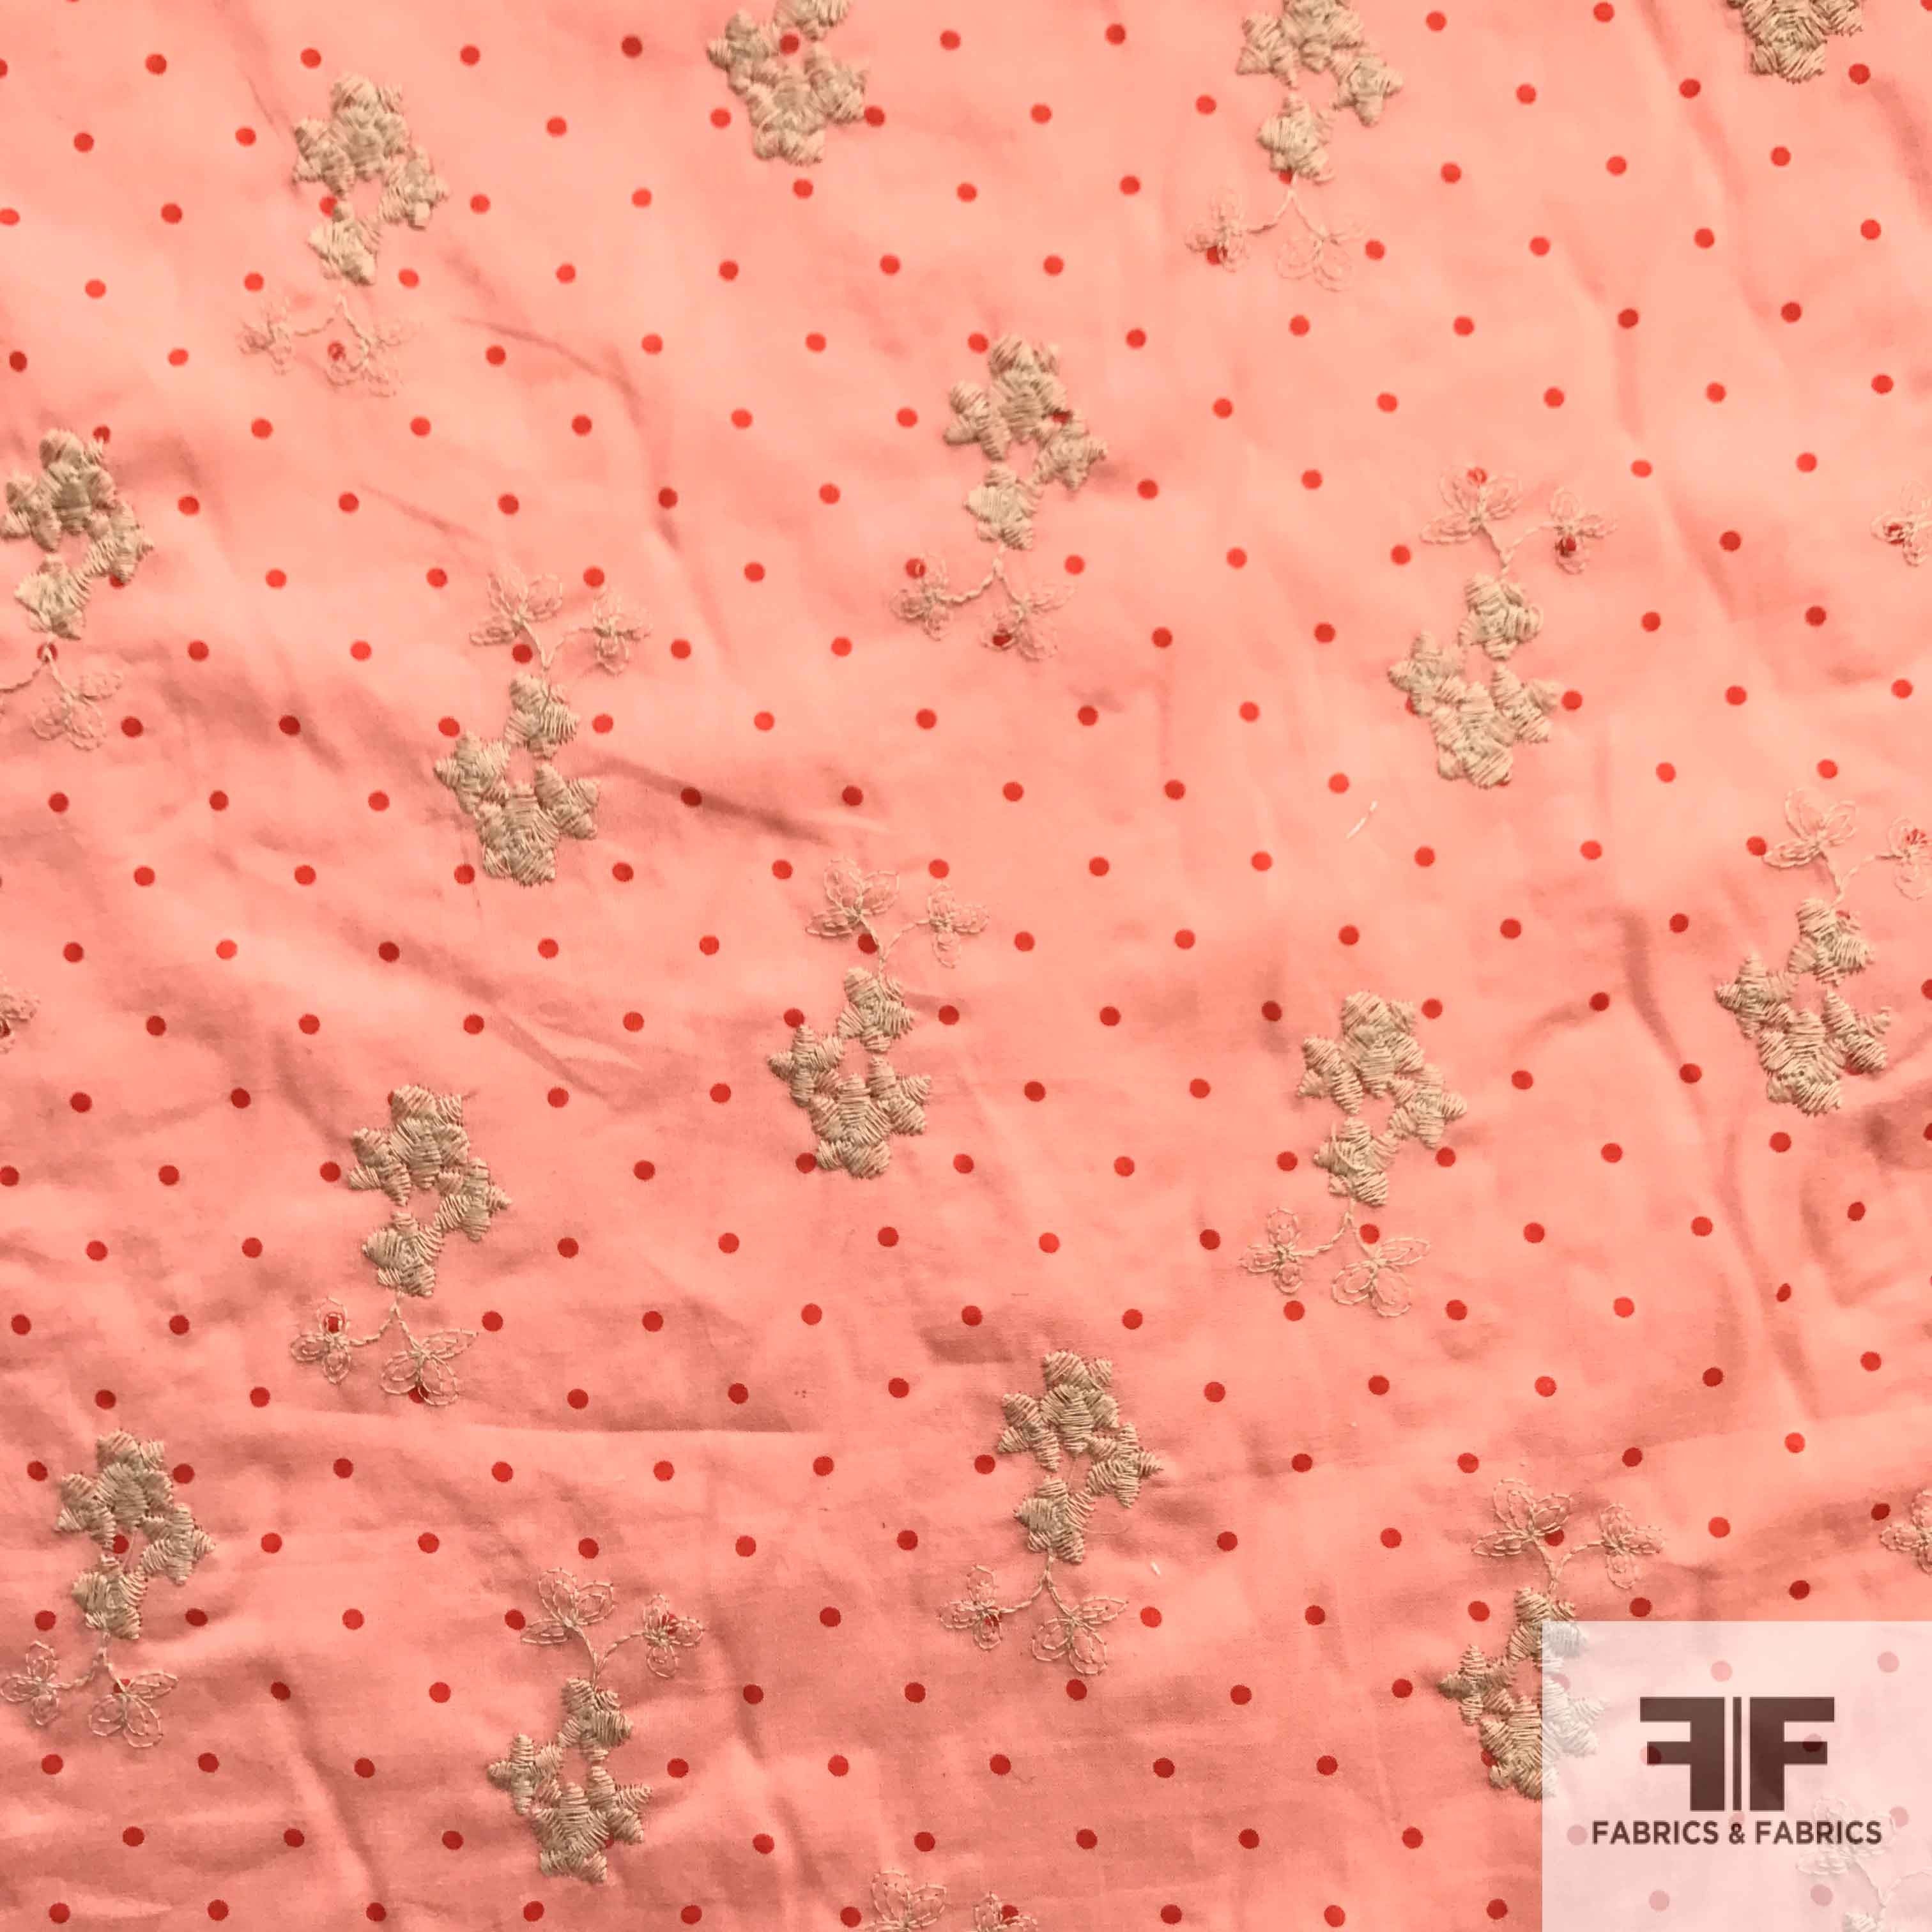 Polka Dot and Floral Embroidered Cotton - Pink/Cream/Red